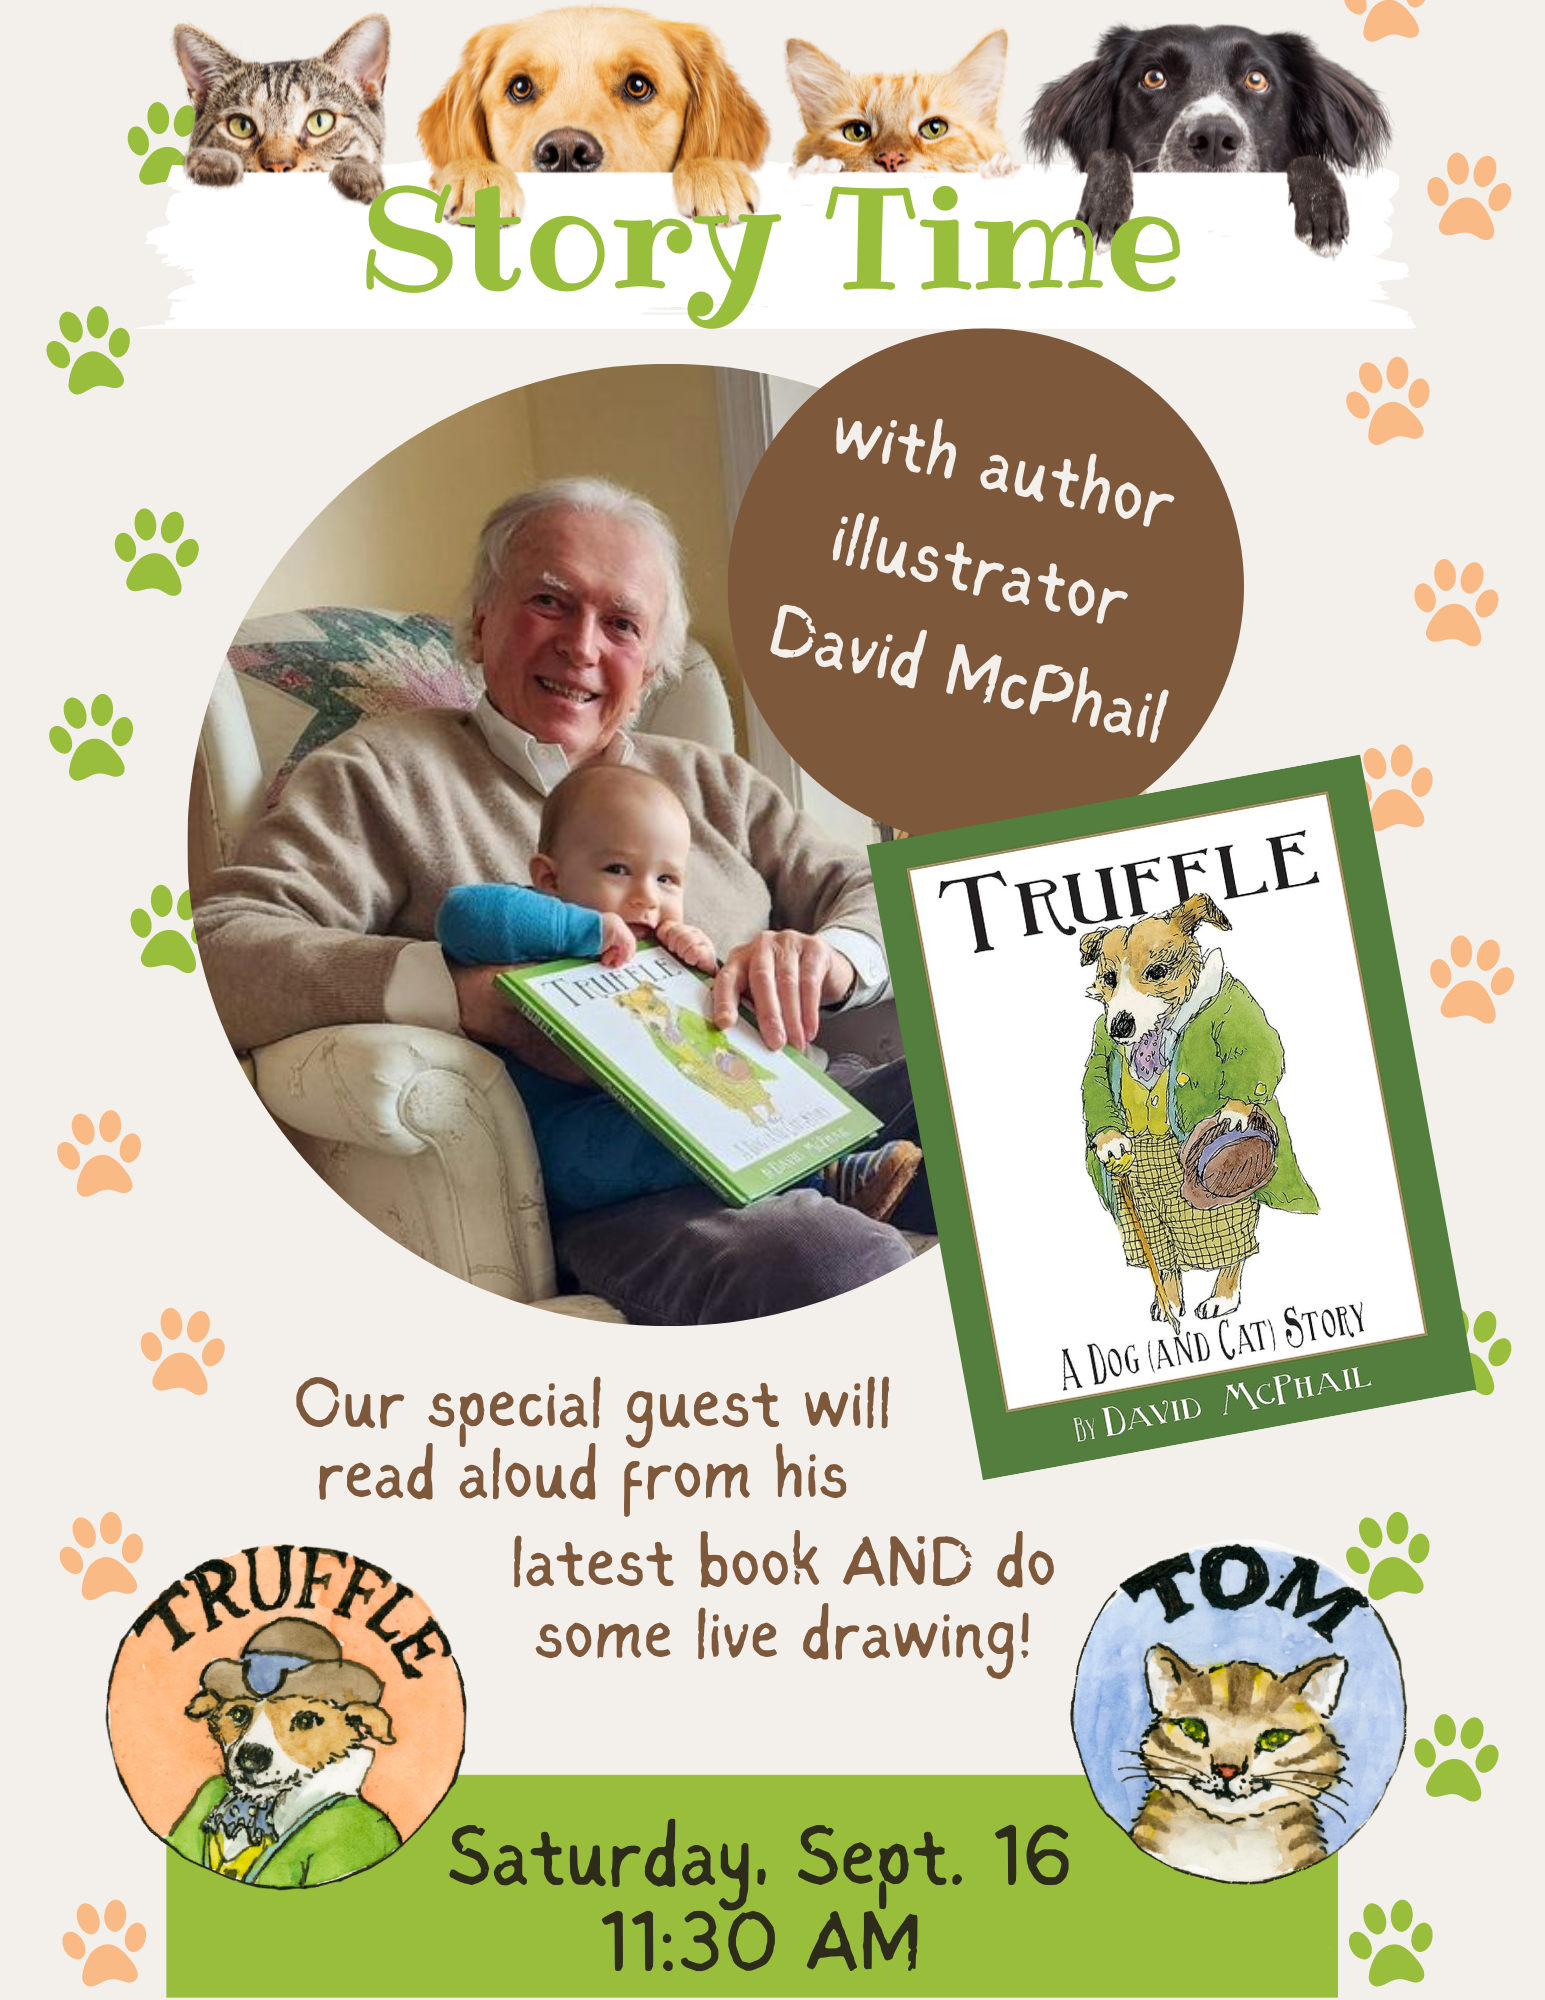 David McPhail Story Time with images of drawn dog and cat